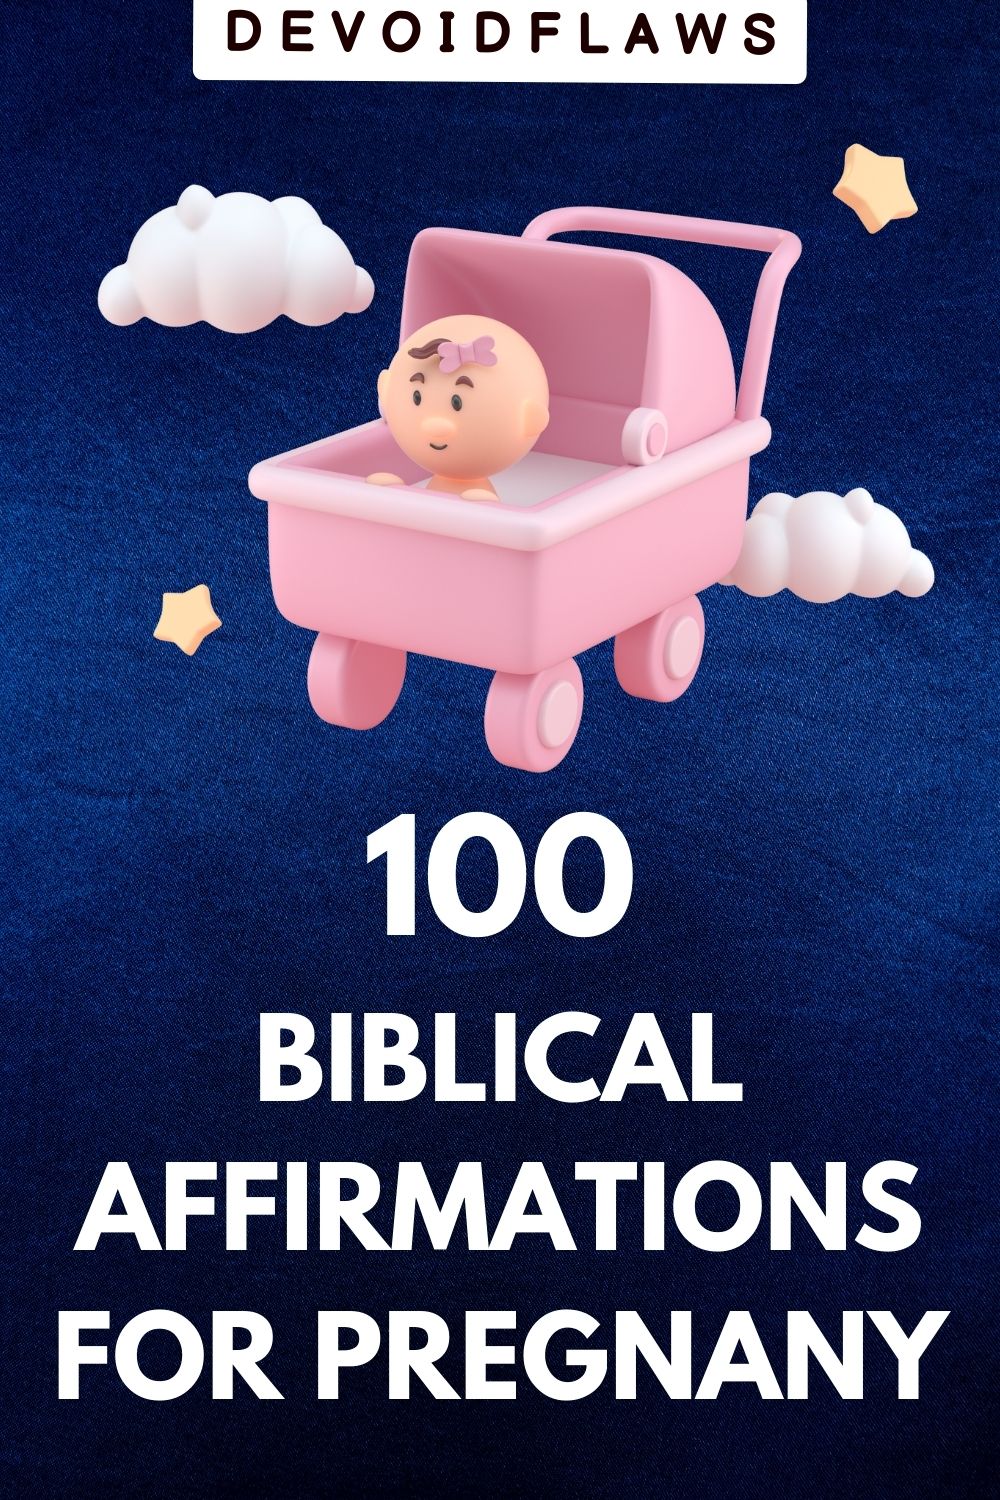 blue background image with text - 100 biblical affirmations for pregnancy